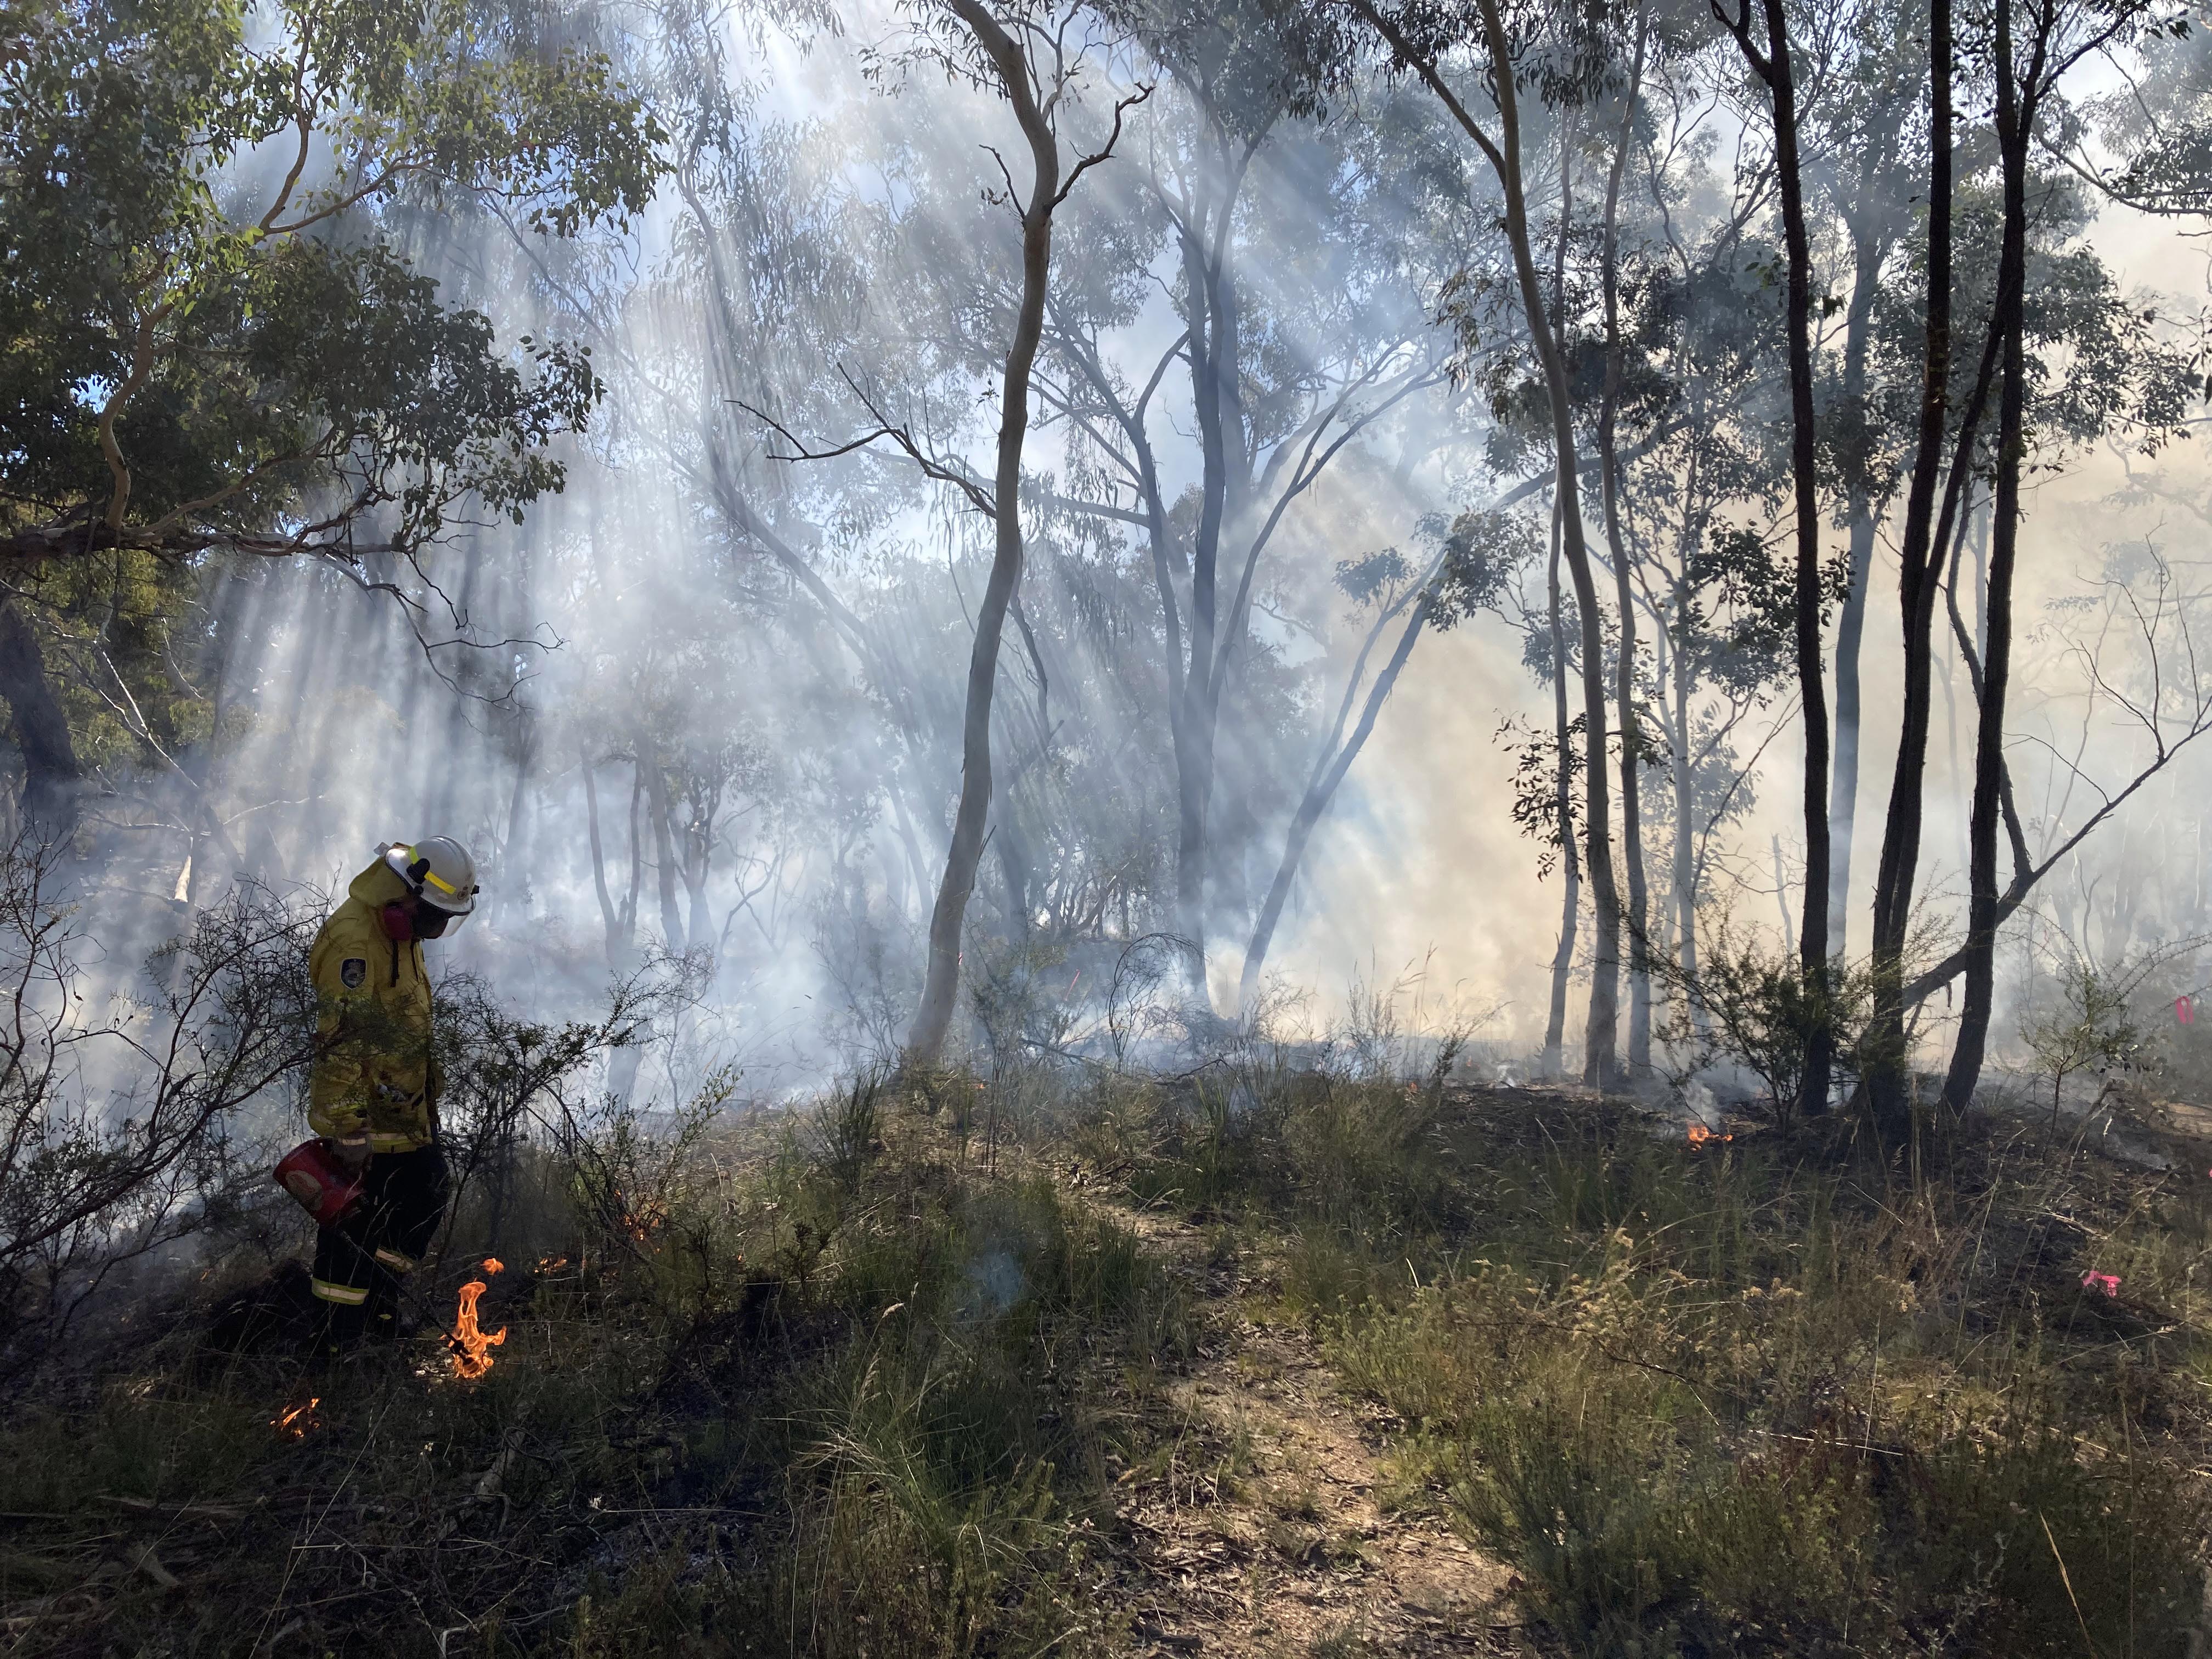 A firefighter wearing hi viz yellow clothing gently lights the grasses and shrubs on the ground with the sun streaming through the smoke and trees behind. Image by Gerarda Mader.